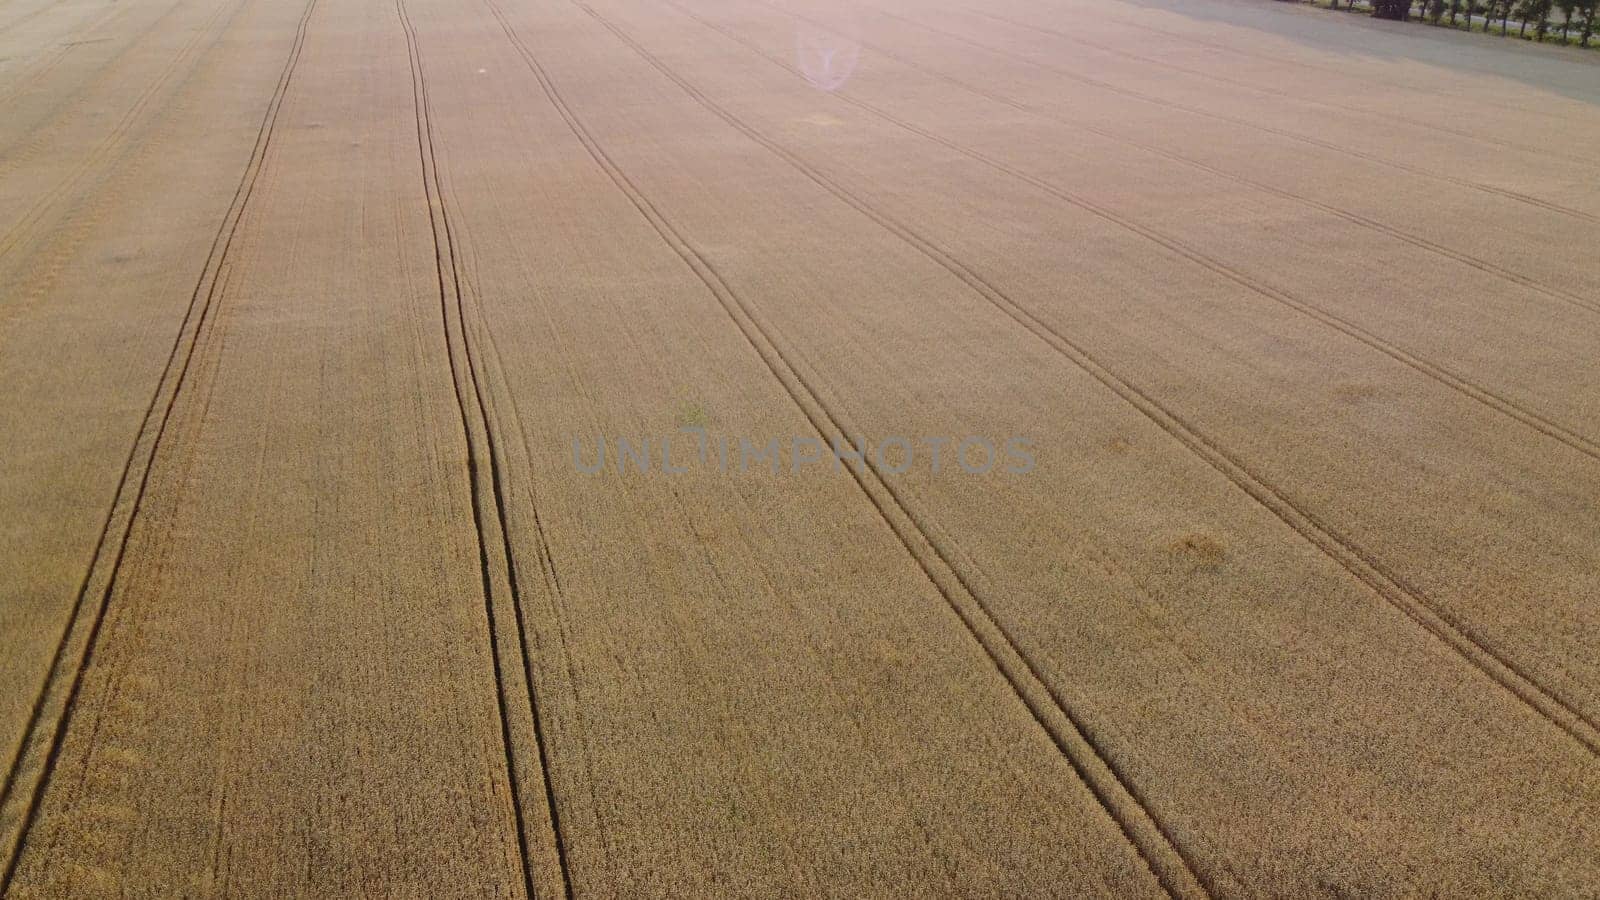 Wheat field. Flying over wheat field with ears mature ripe wheat. by Mari1408